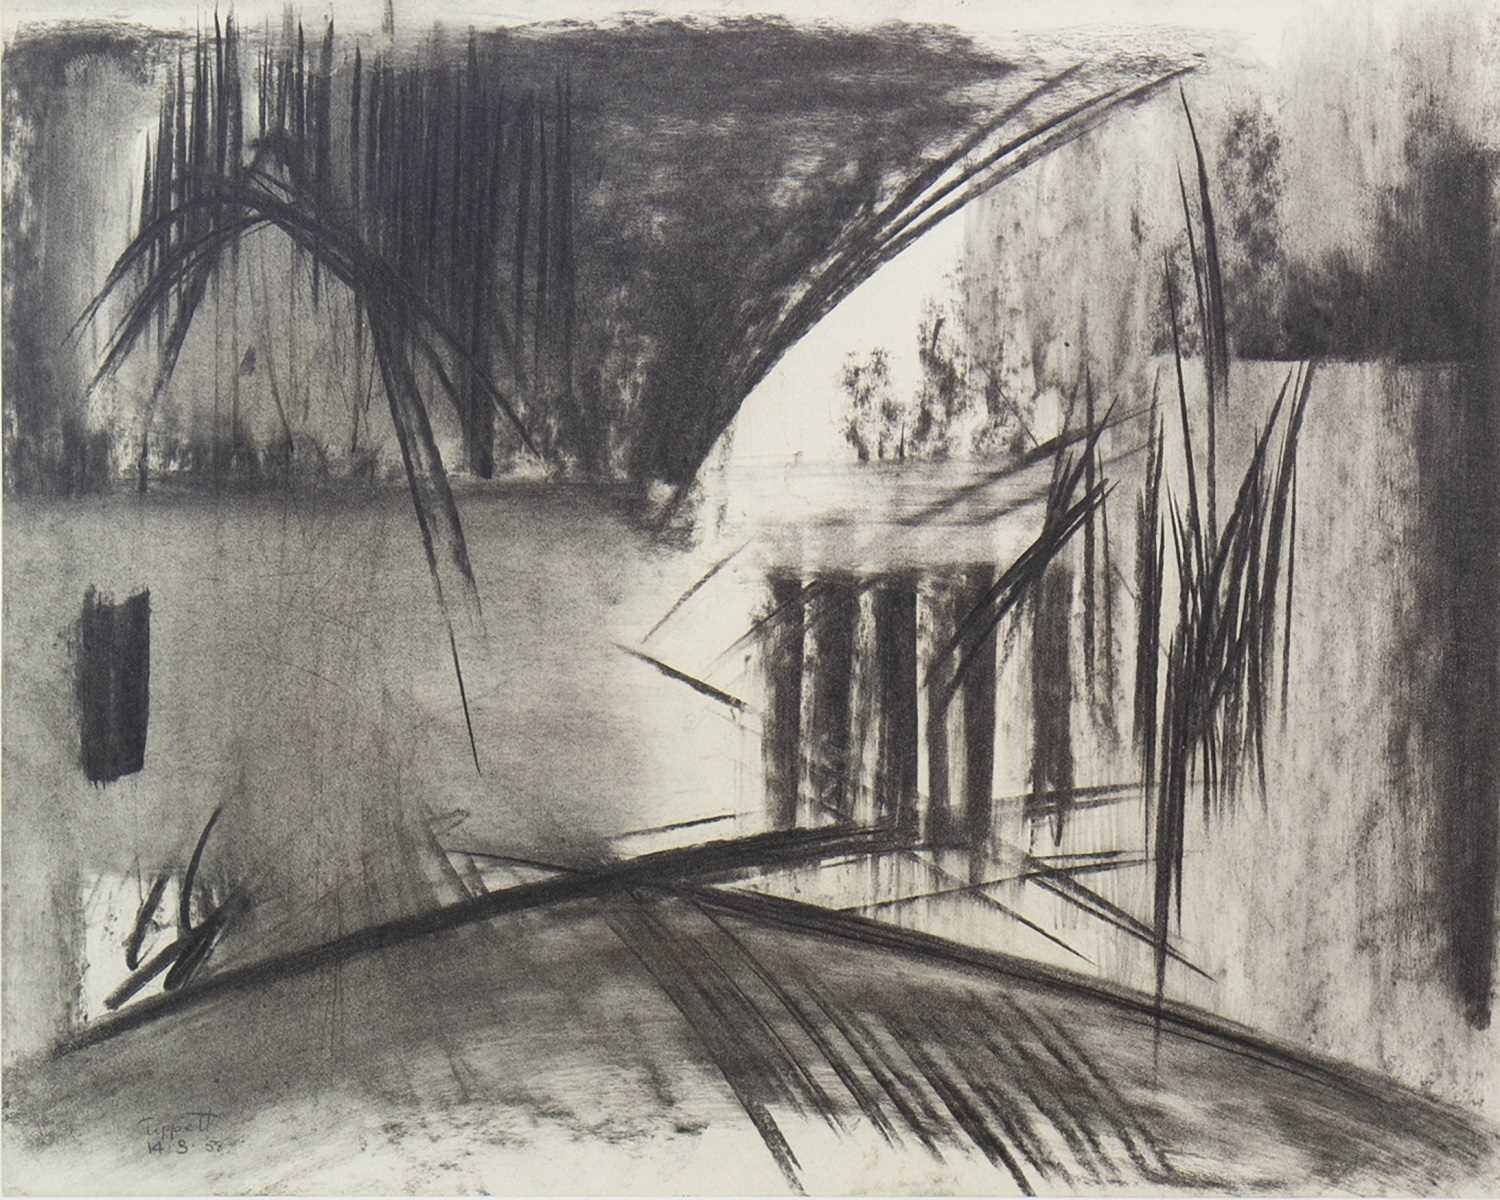 Lot 661 - LANDSCAPE WITH REEDS, CHARCOAL ON PAPER BY BRUCE TIPPETT